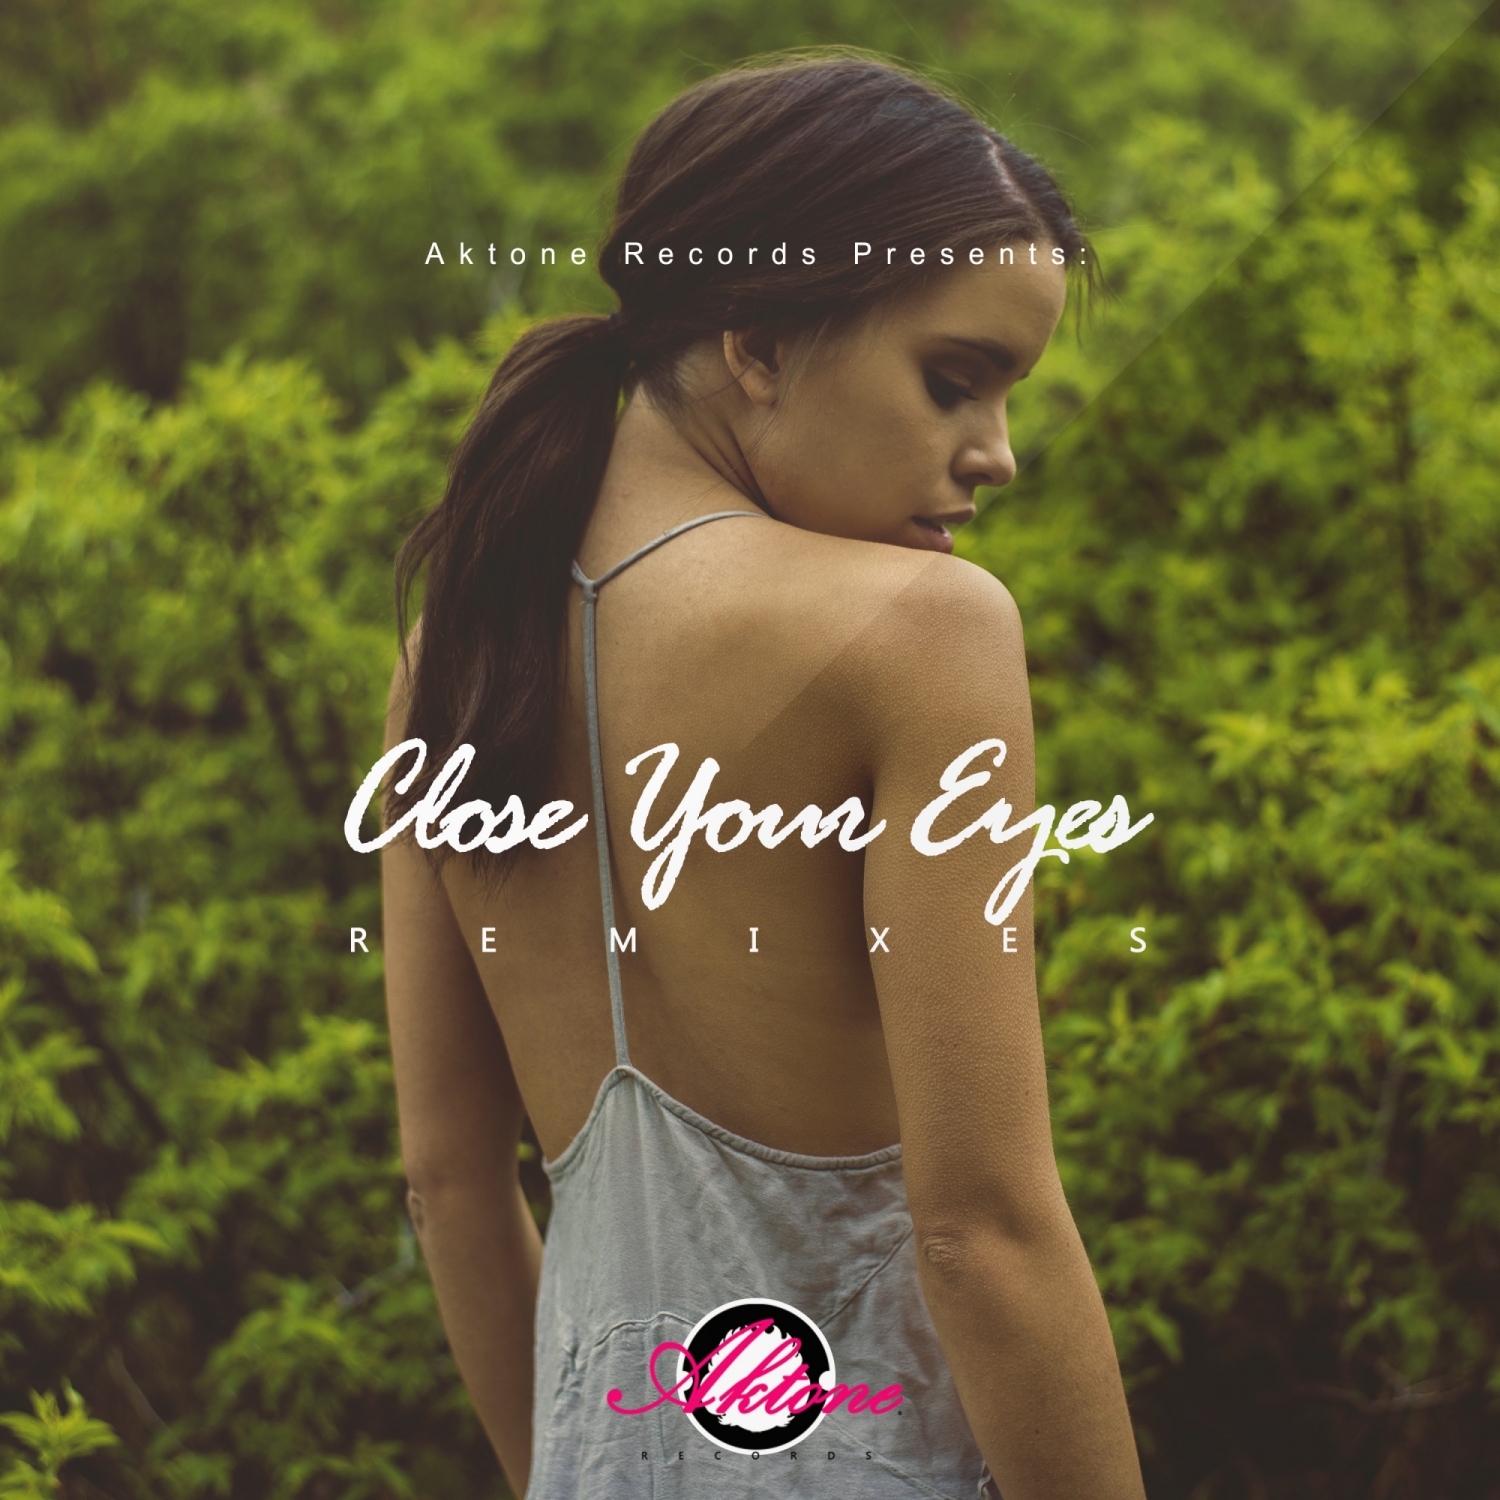 Ln your. Imazee in your Eyes. Close Eyes Remix. Close your Eyes песня. Album Art 3 close your Eyes.